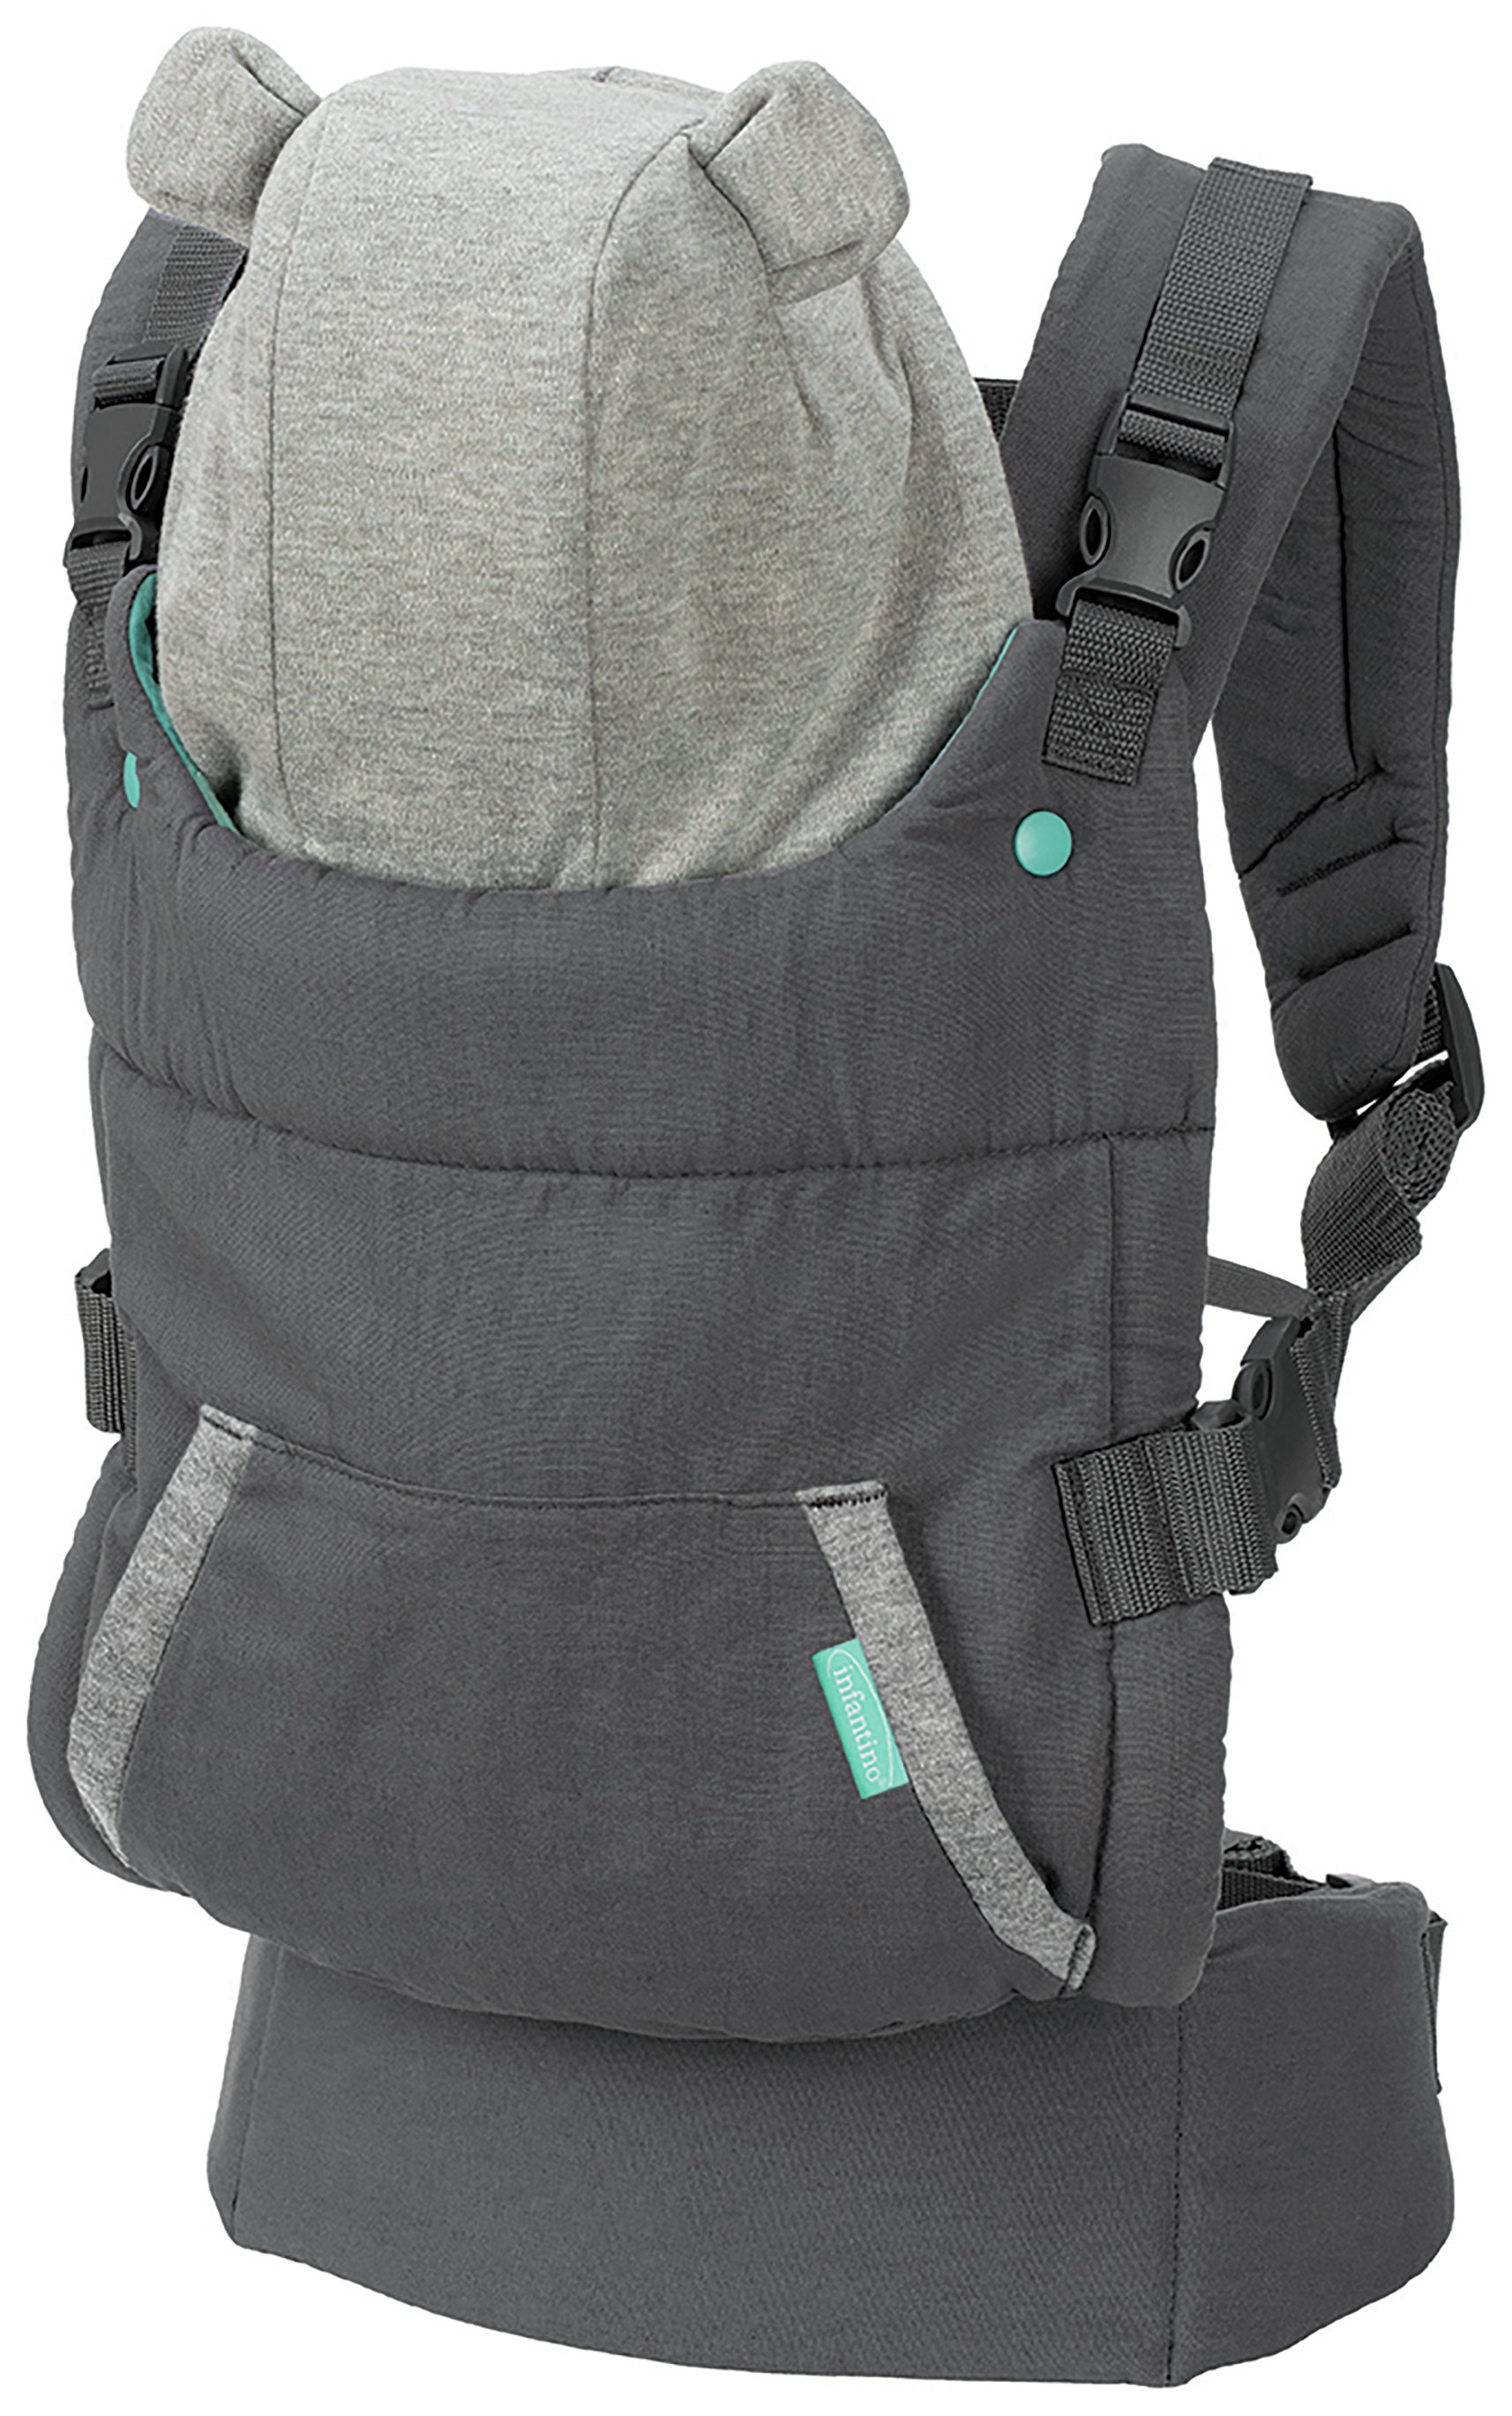 Infantino Cuddle Up Hoodie Carrier